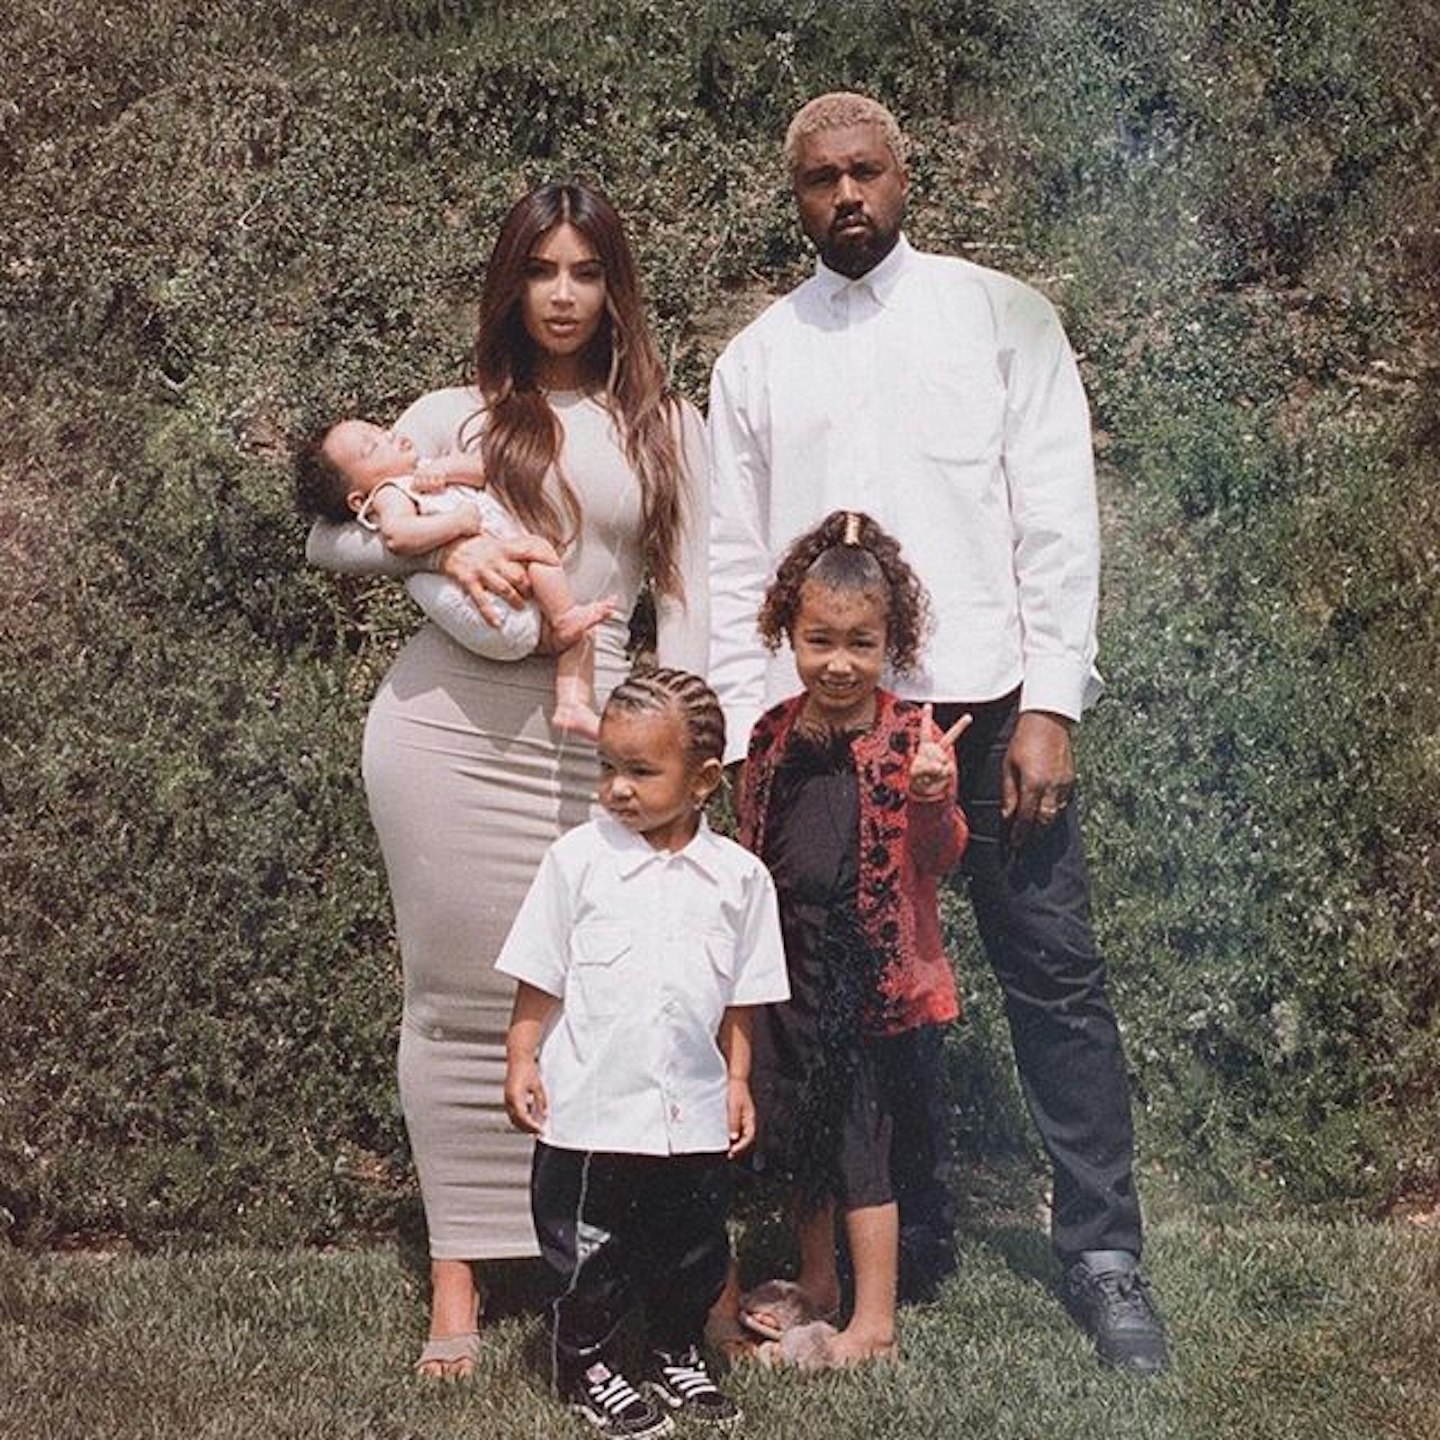 NORTH WEST, SAINT WEST AND CHICAGO WEST